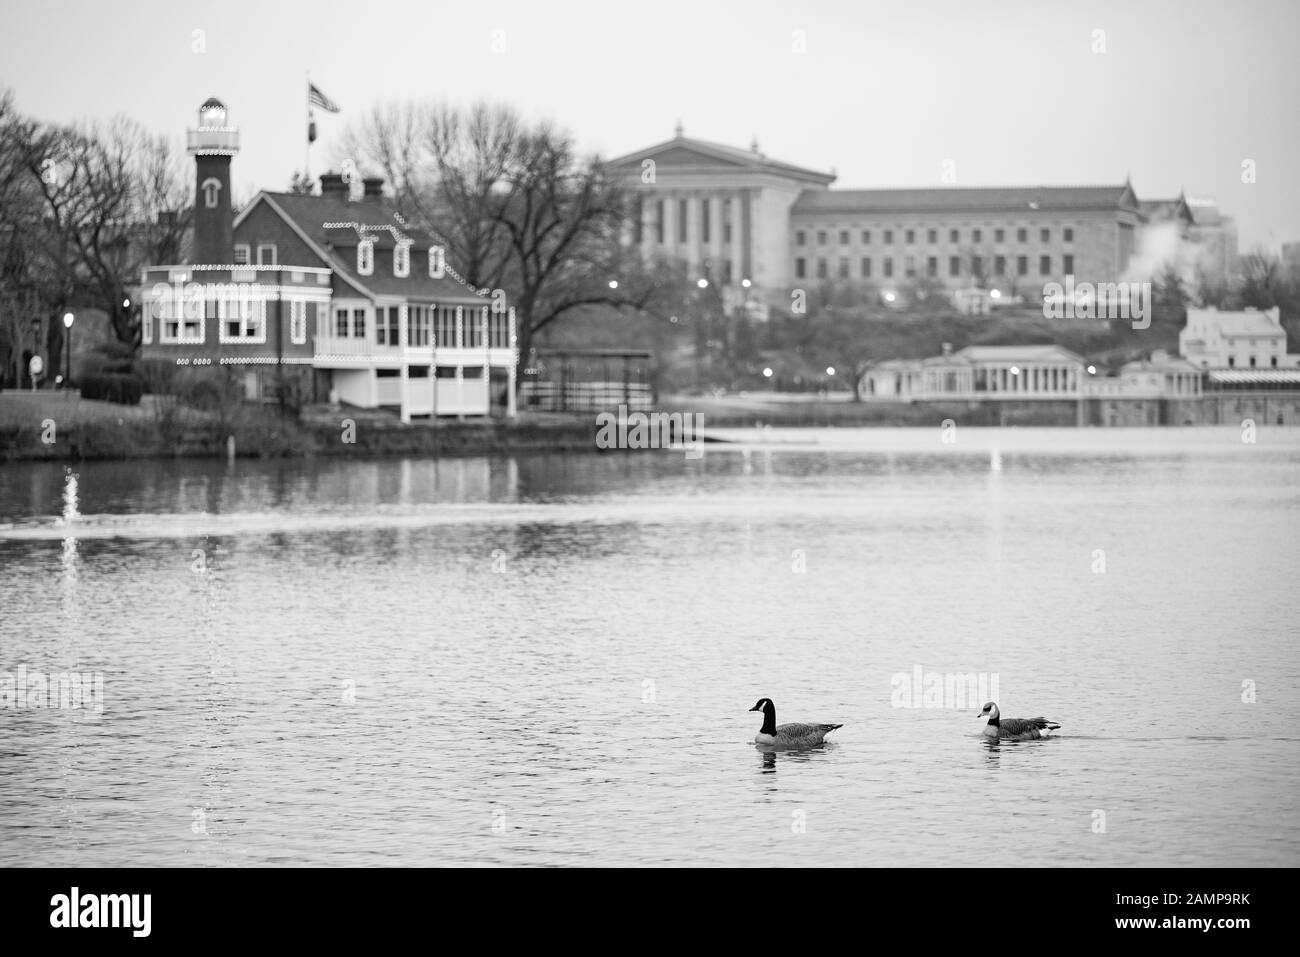 A black and white photo of two ducks swimming on a river with an illuminated boathouse and the Philadelphia Museum of Art in the background. Stock Photo